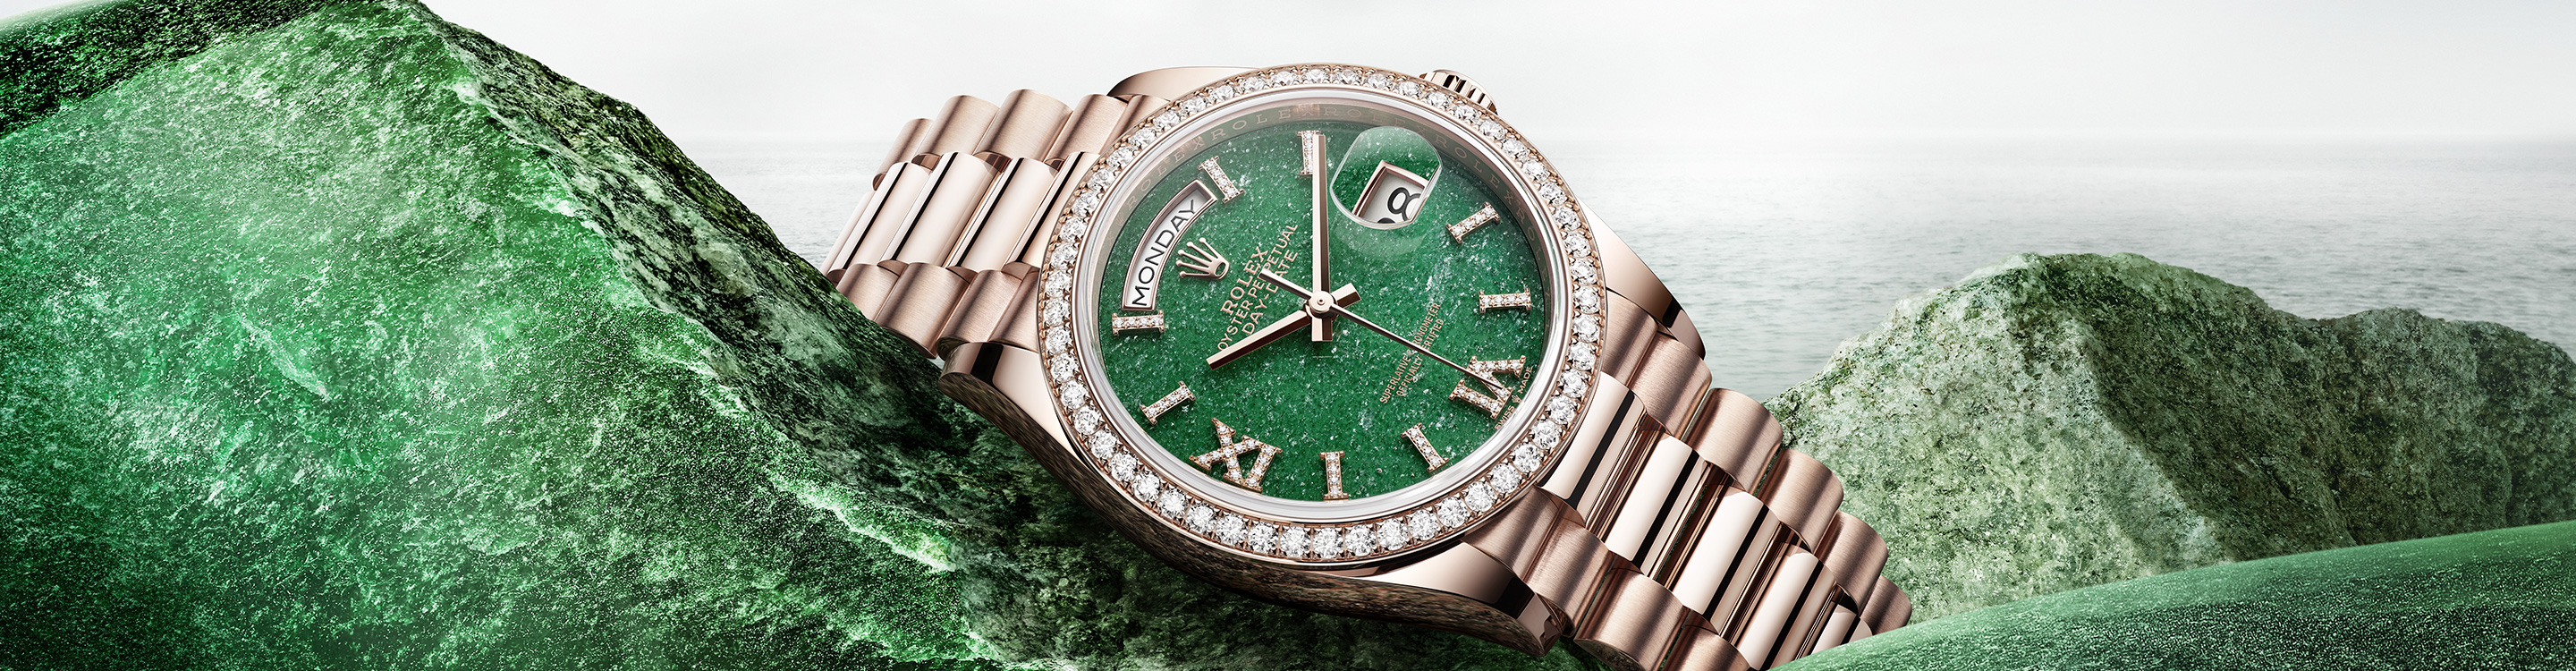 Rose gold Rolex watch with green dial and diamond detail